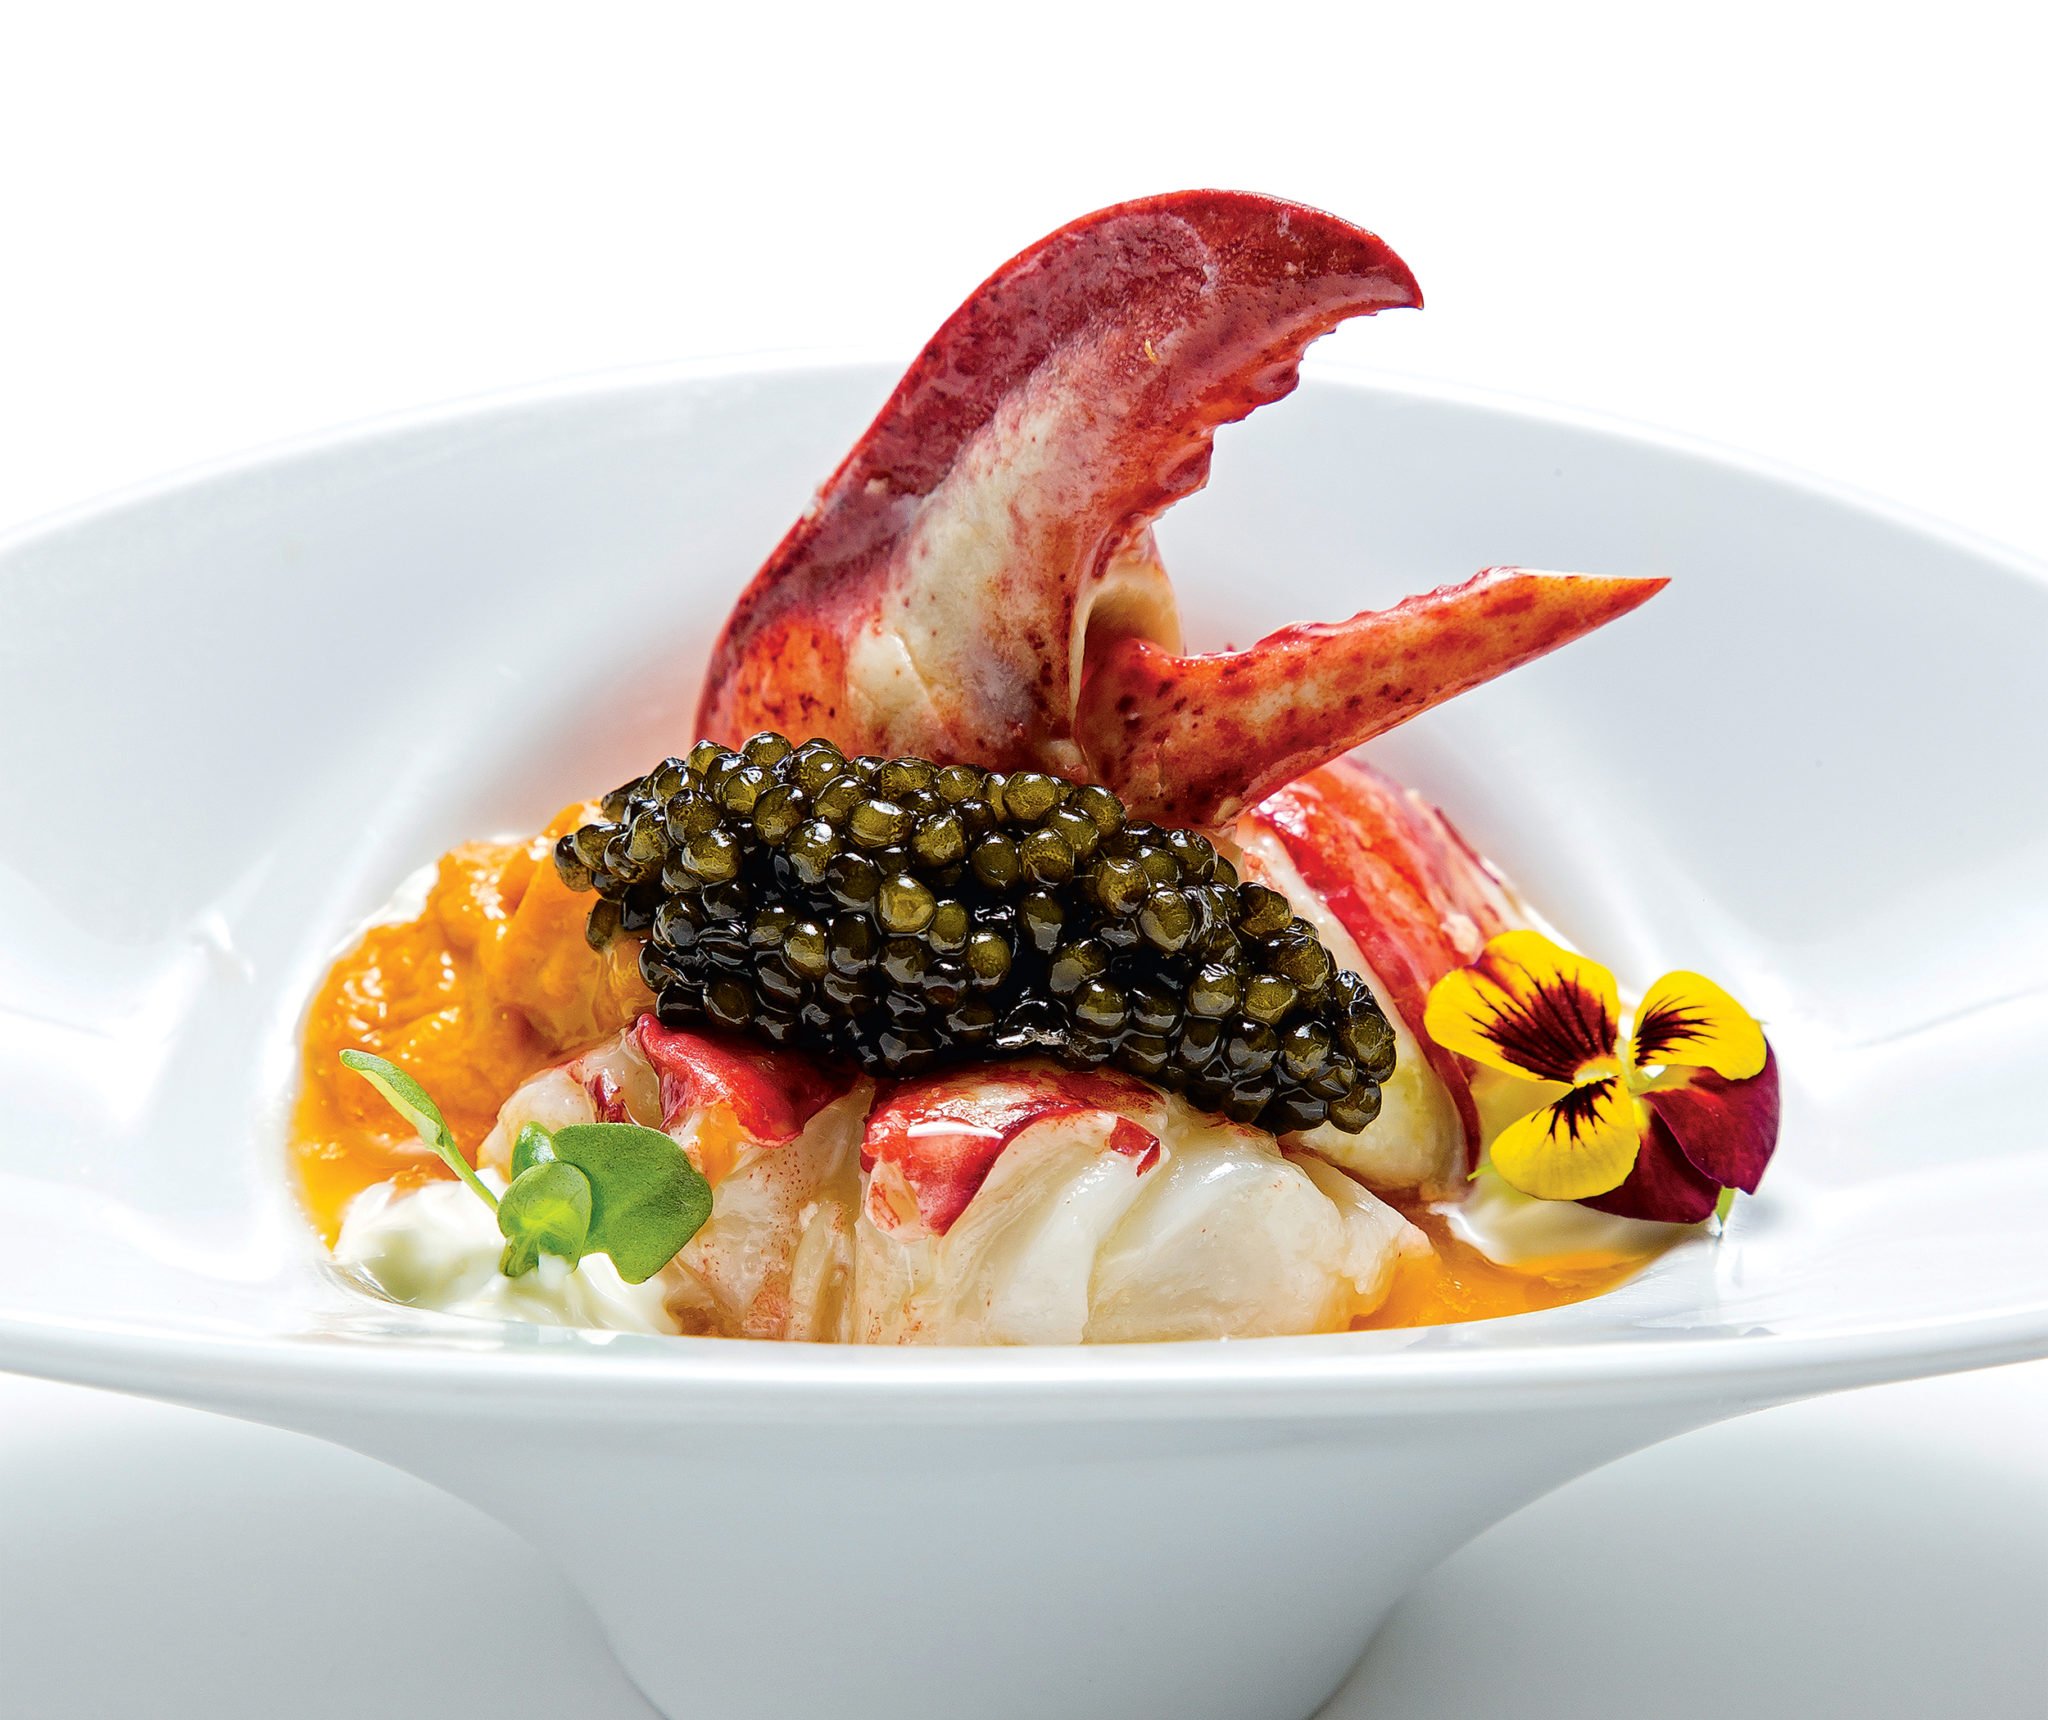 James Beard Semi-finalists 2018, Sea-urchin flan with lobster and caviar at Marcel's.